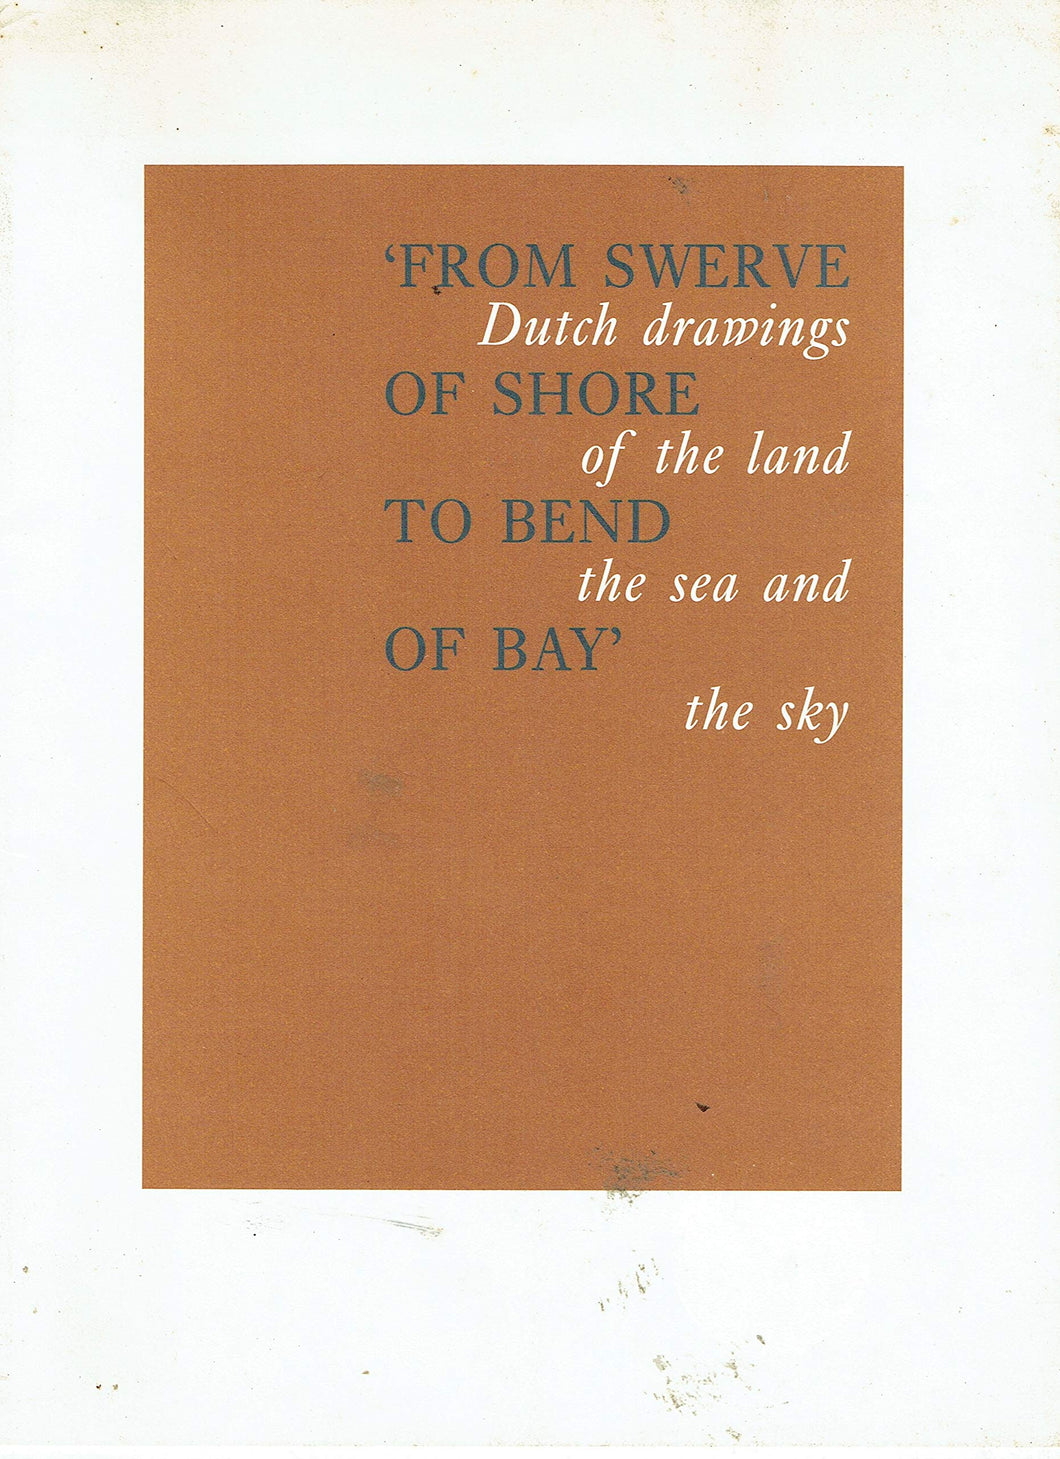 From Swerve of Shore to Bend of Bay': Dutch Drawings of the Land the Sea and the Sky